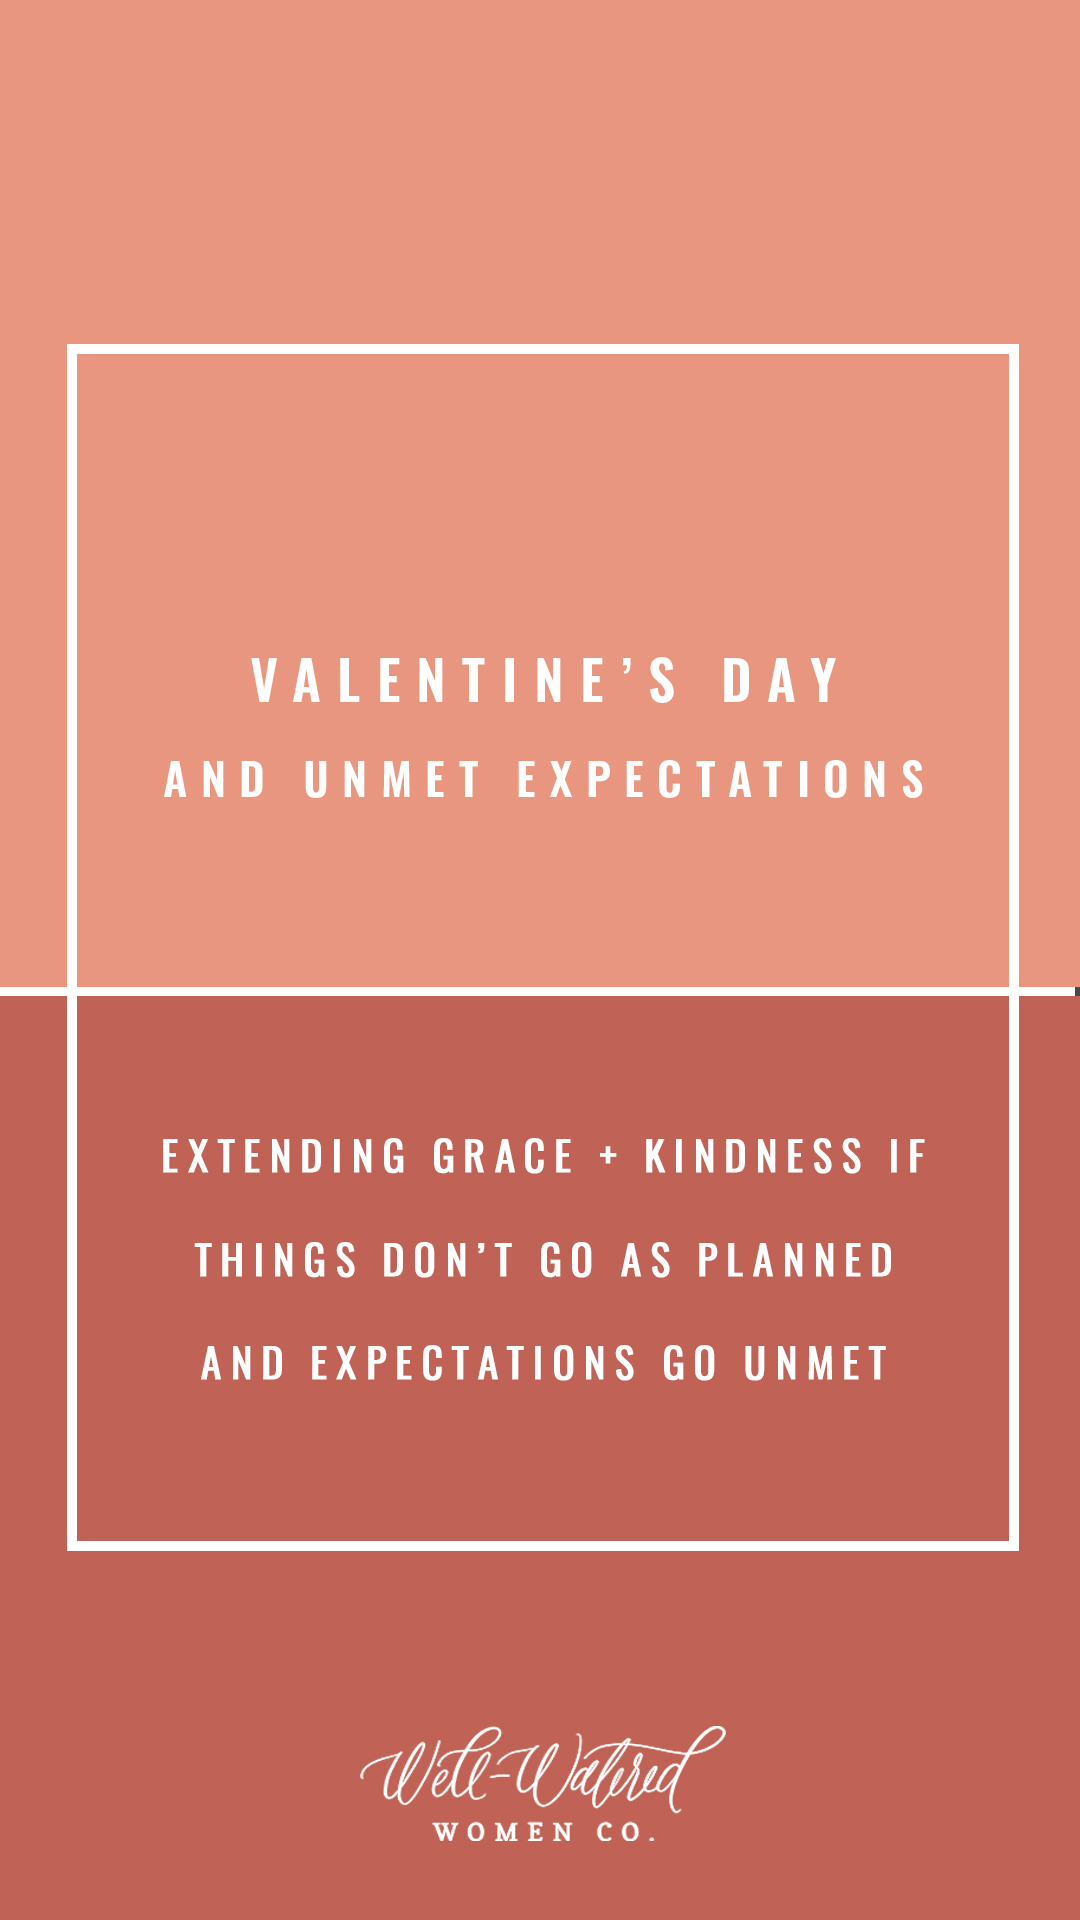 Well Watered Women Blog | Valentine's Day and Unmet Expectations - How to Extend Grace